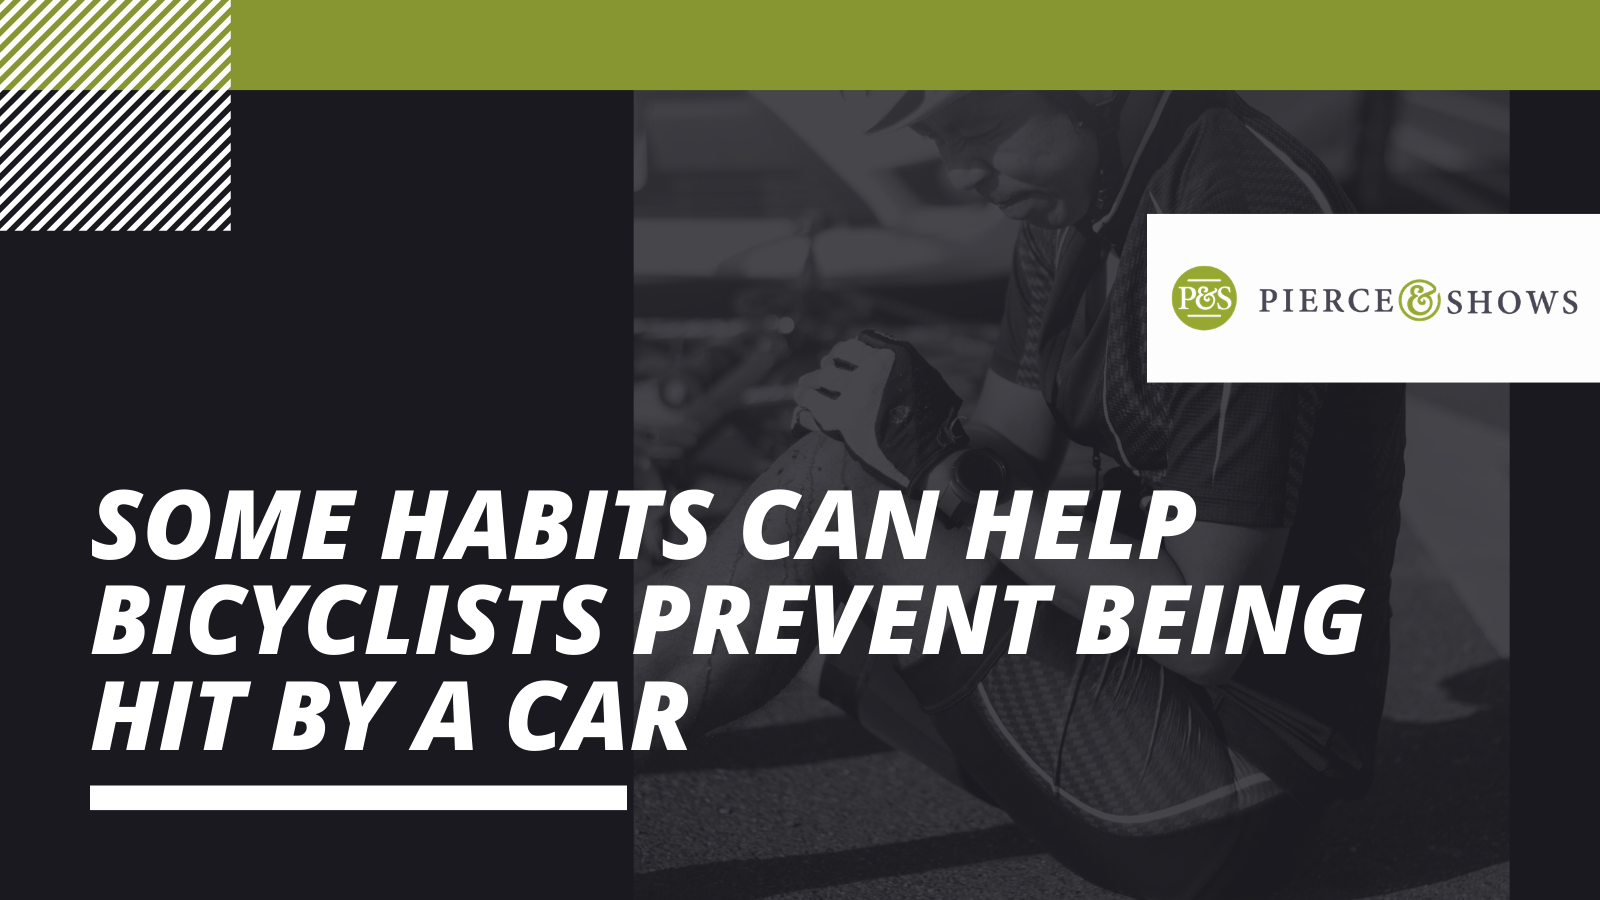 Some Habits Can Help Bicyclists Prevent Being Hit By A Car - Pierce & Shows injury attorney Baton Rouge, Louisiana